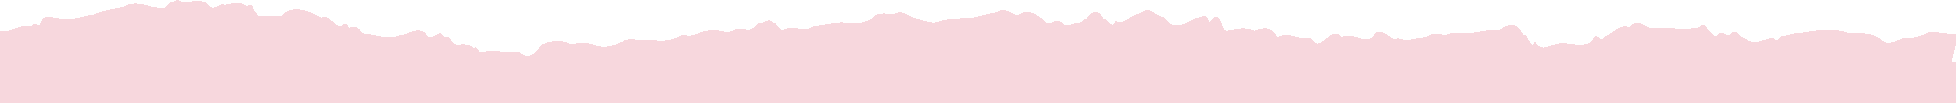 Footer Rowbckgd-Top Pink.png